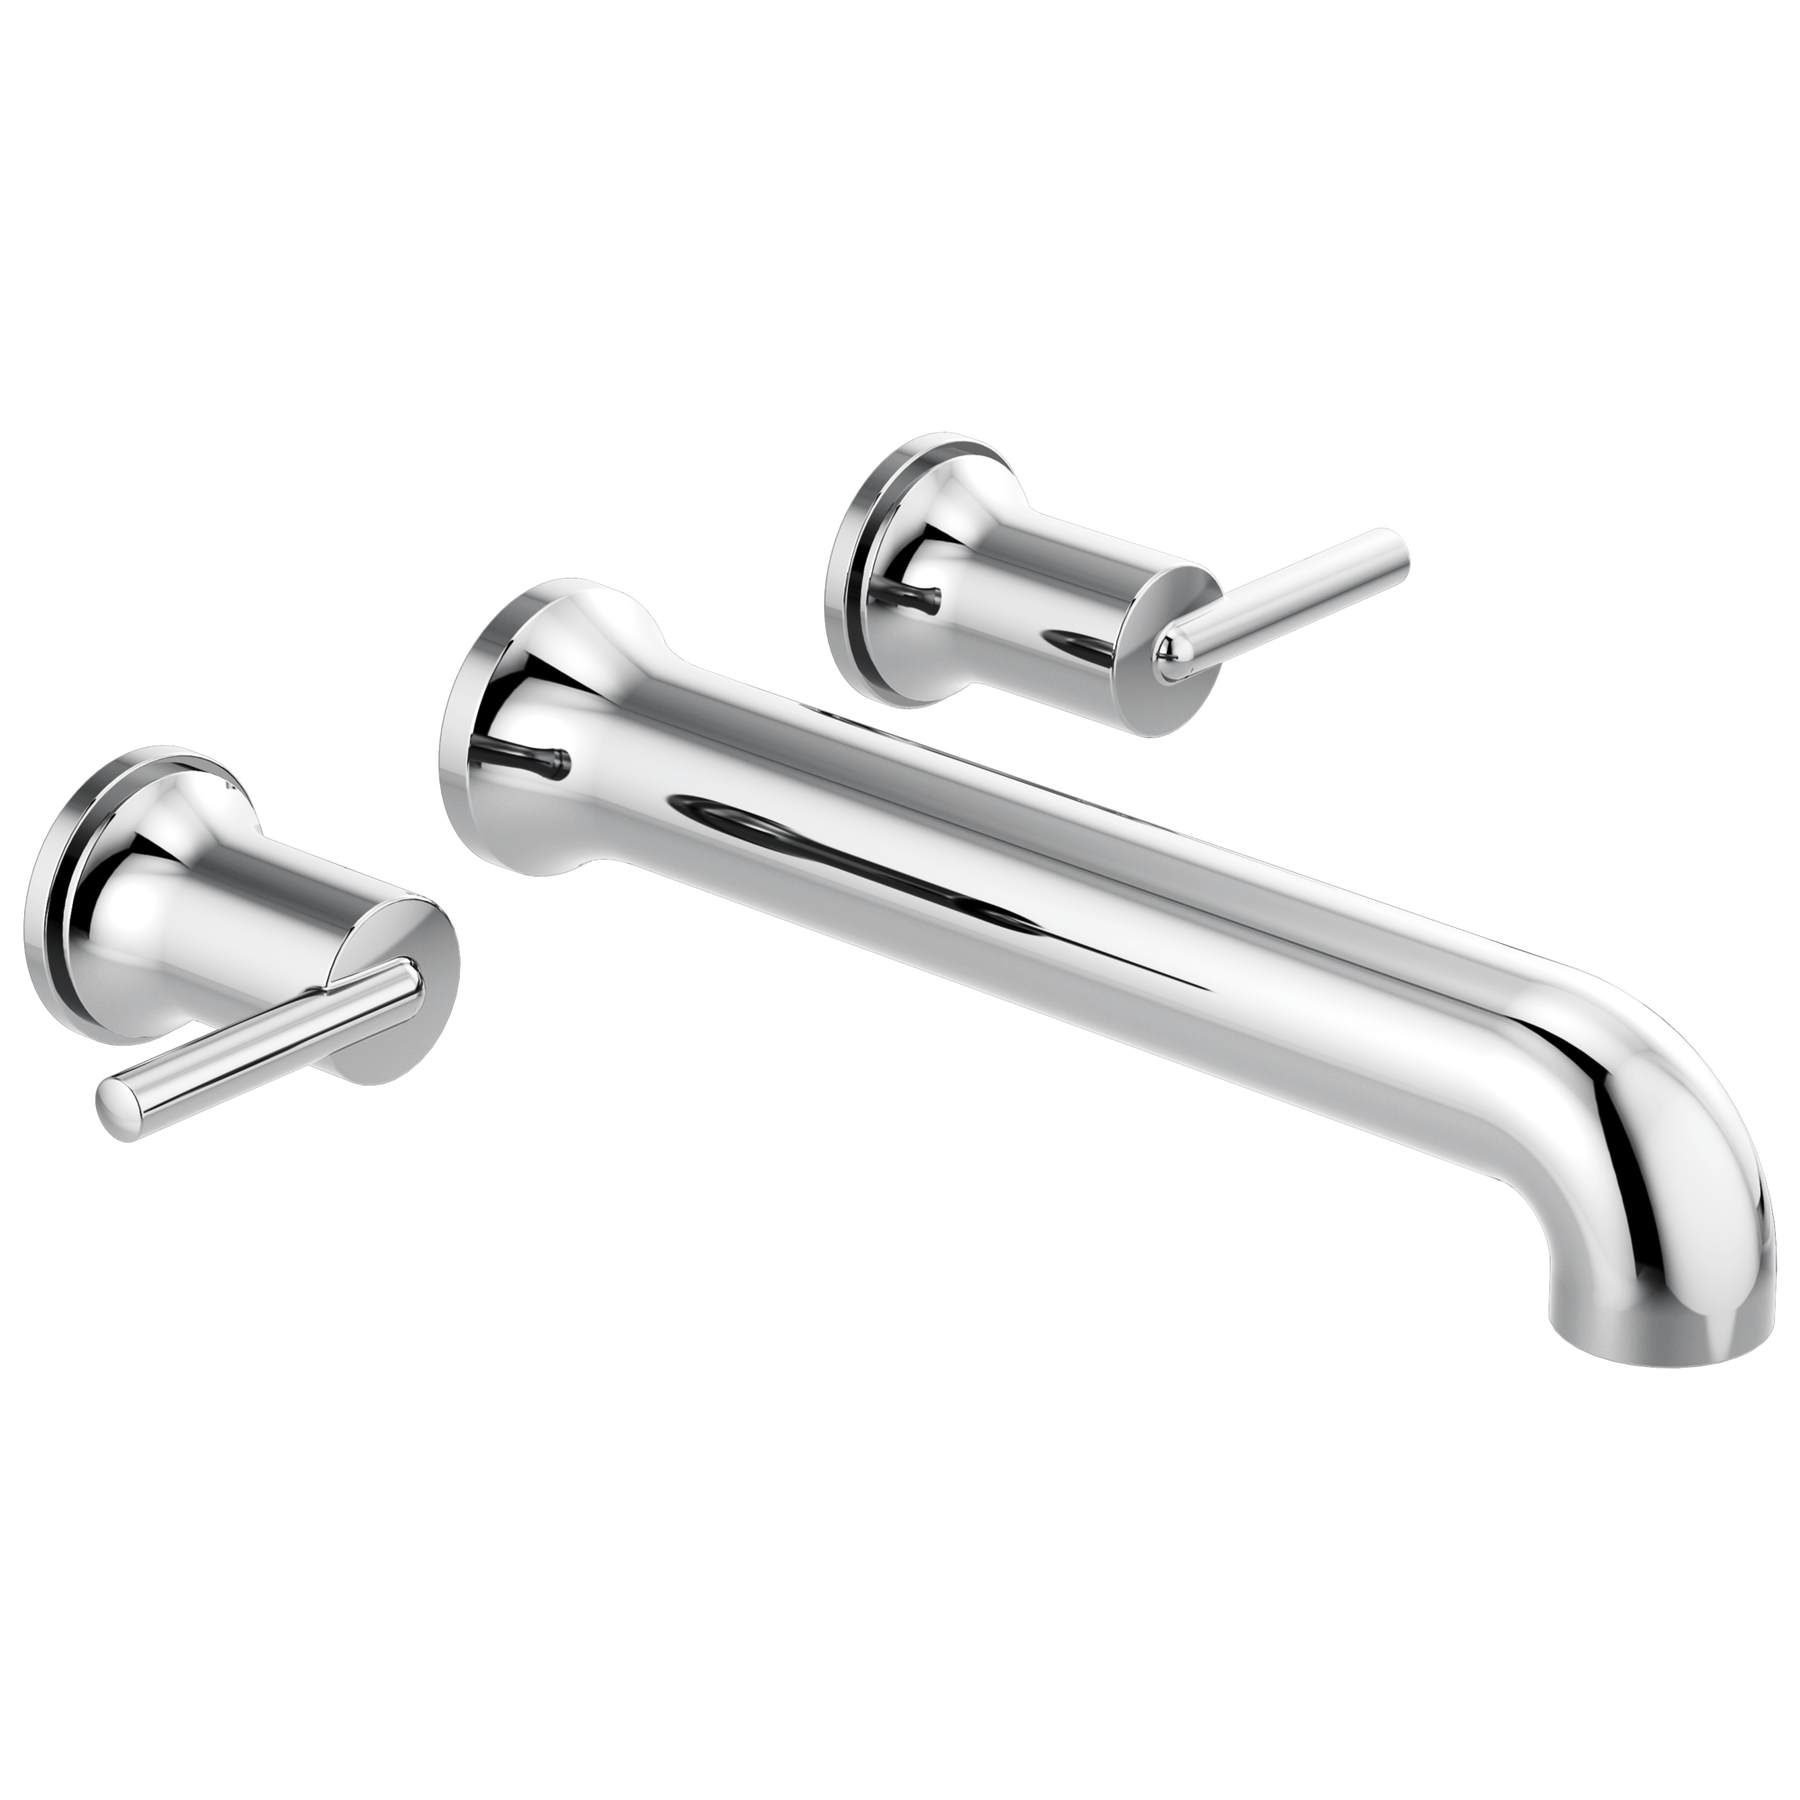 Wall Mounted Tub Filler in Chrome T5759-WL